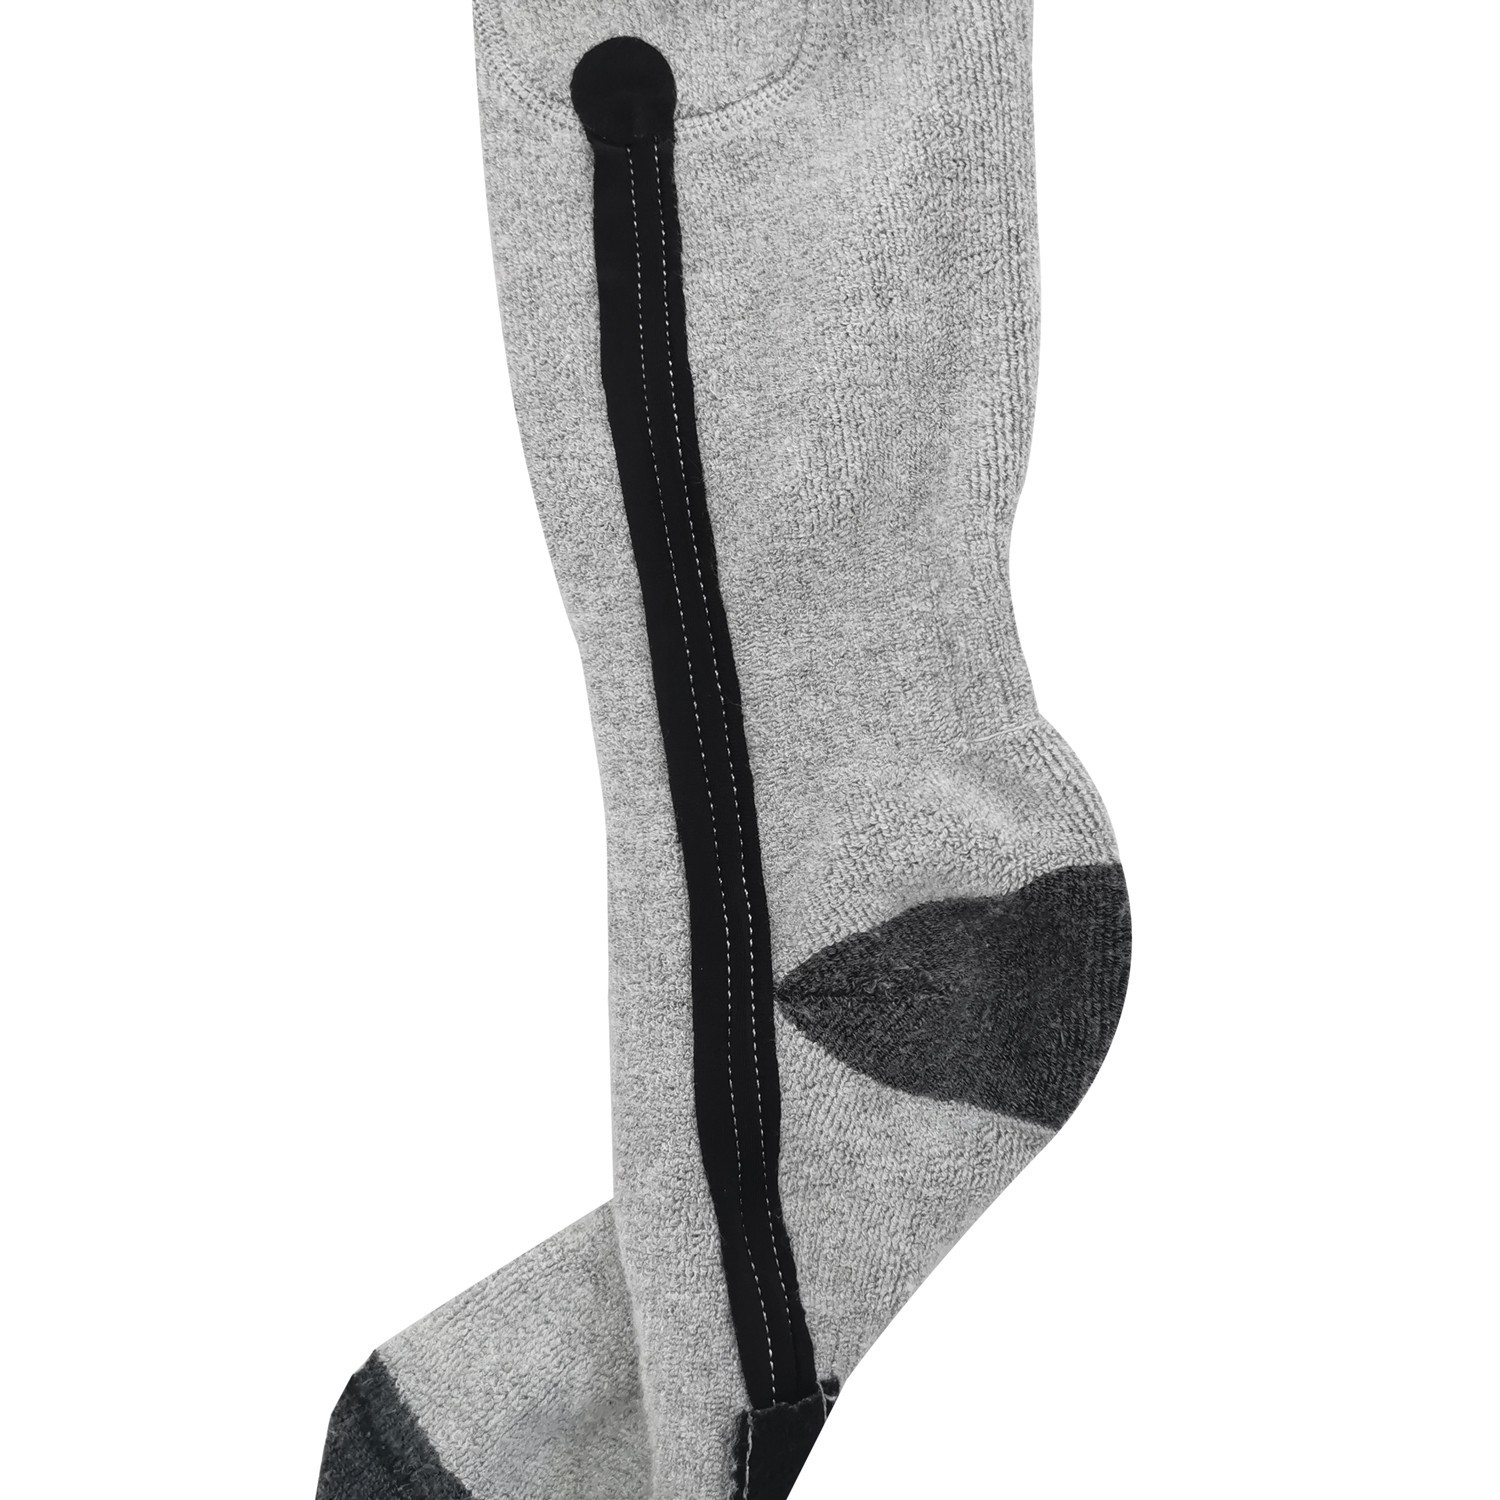 Dr. Warm cotton battery heated socks improves blood circulation for winter